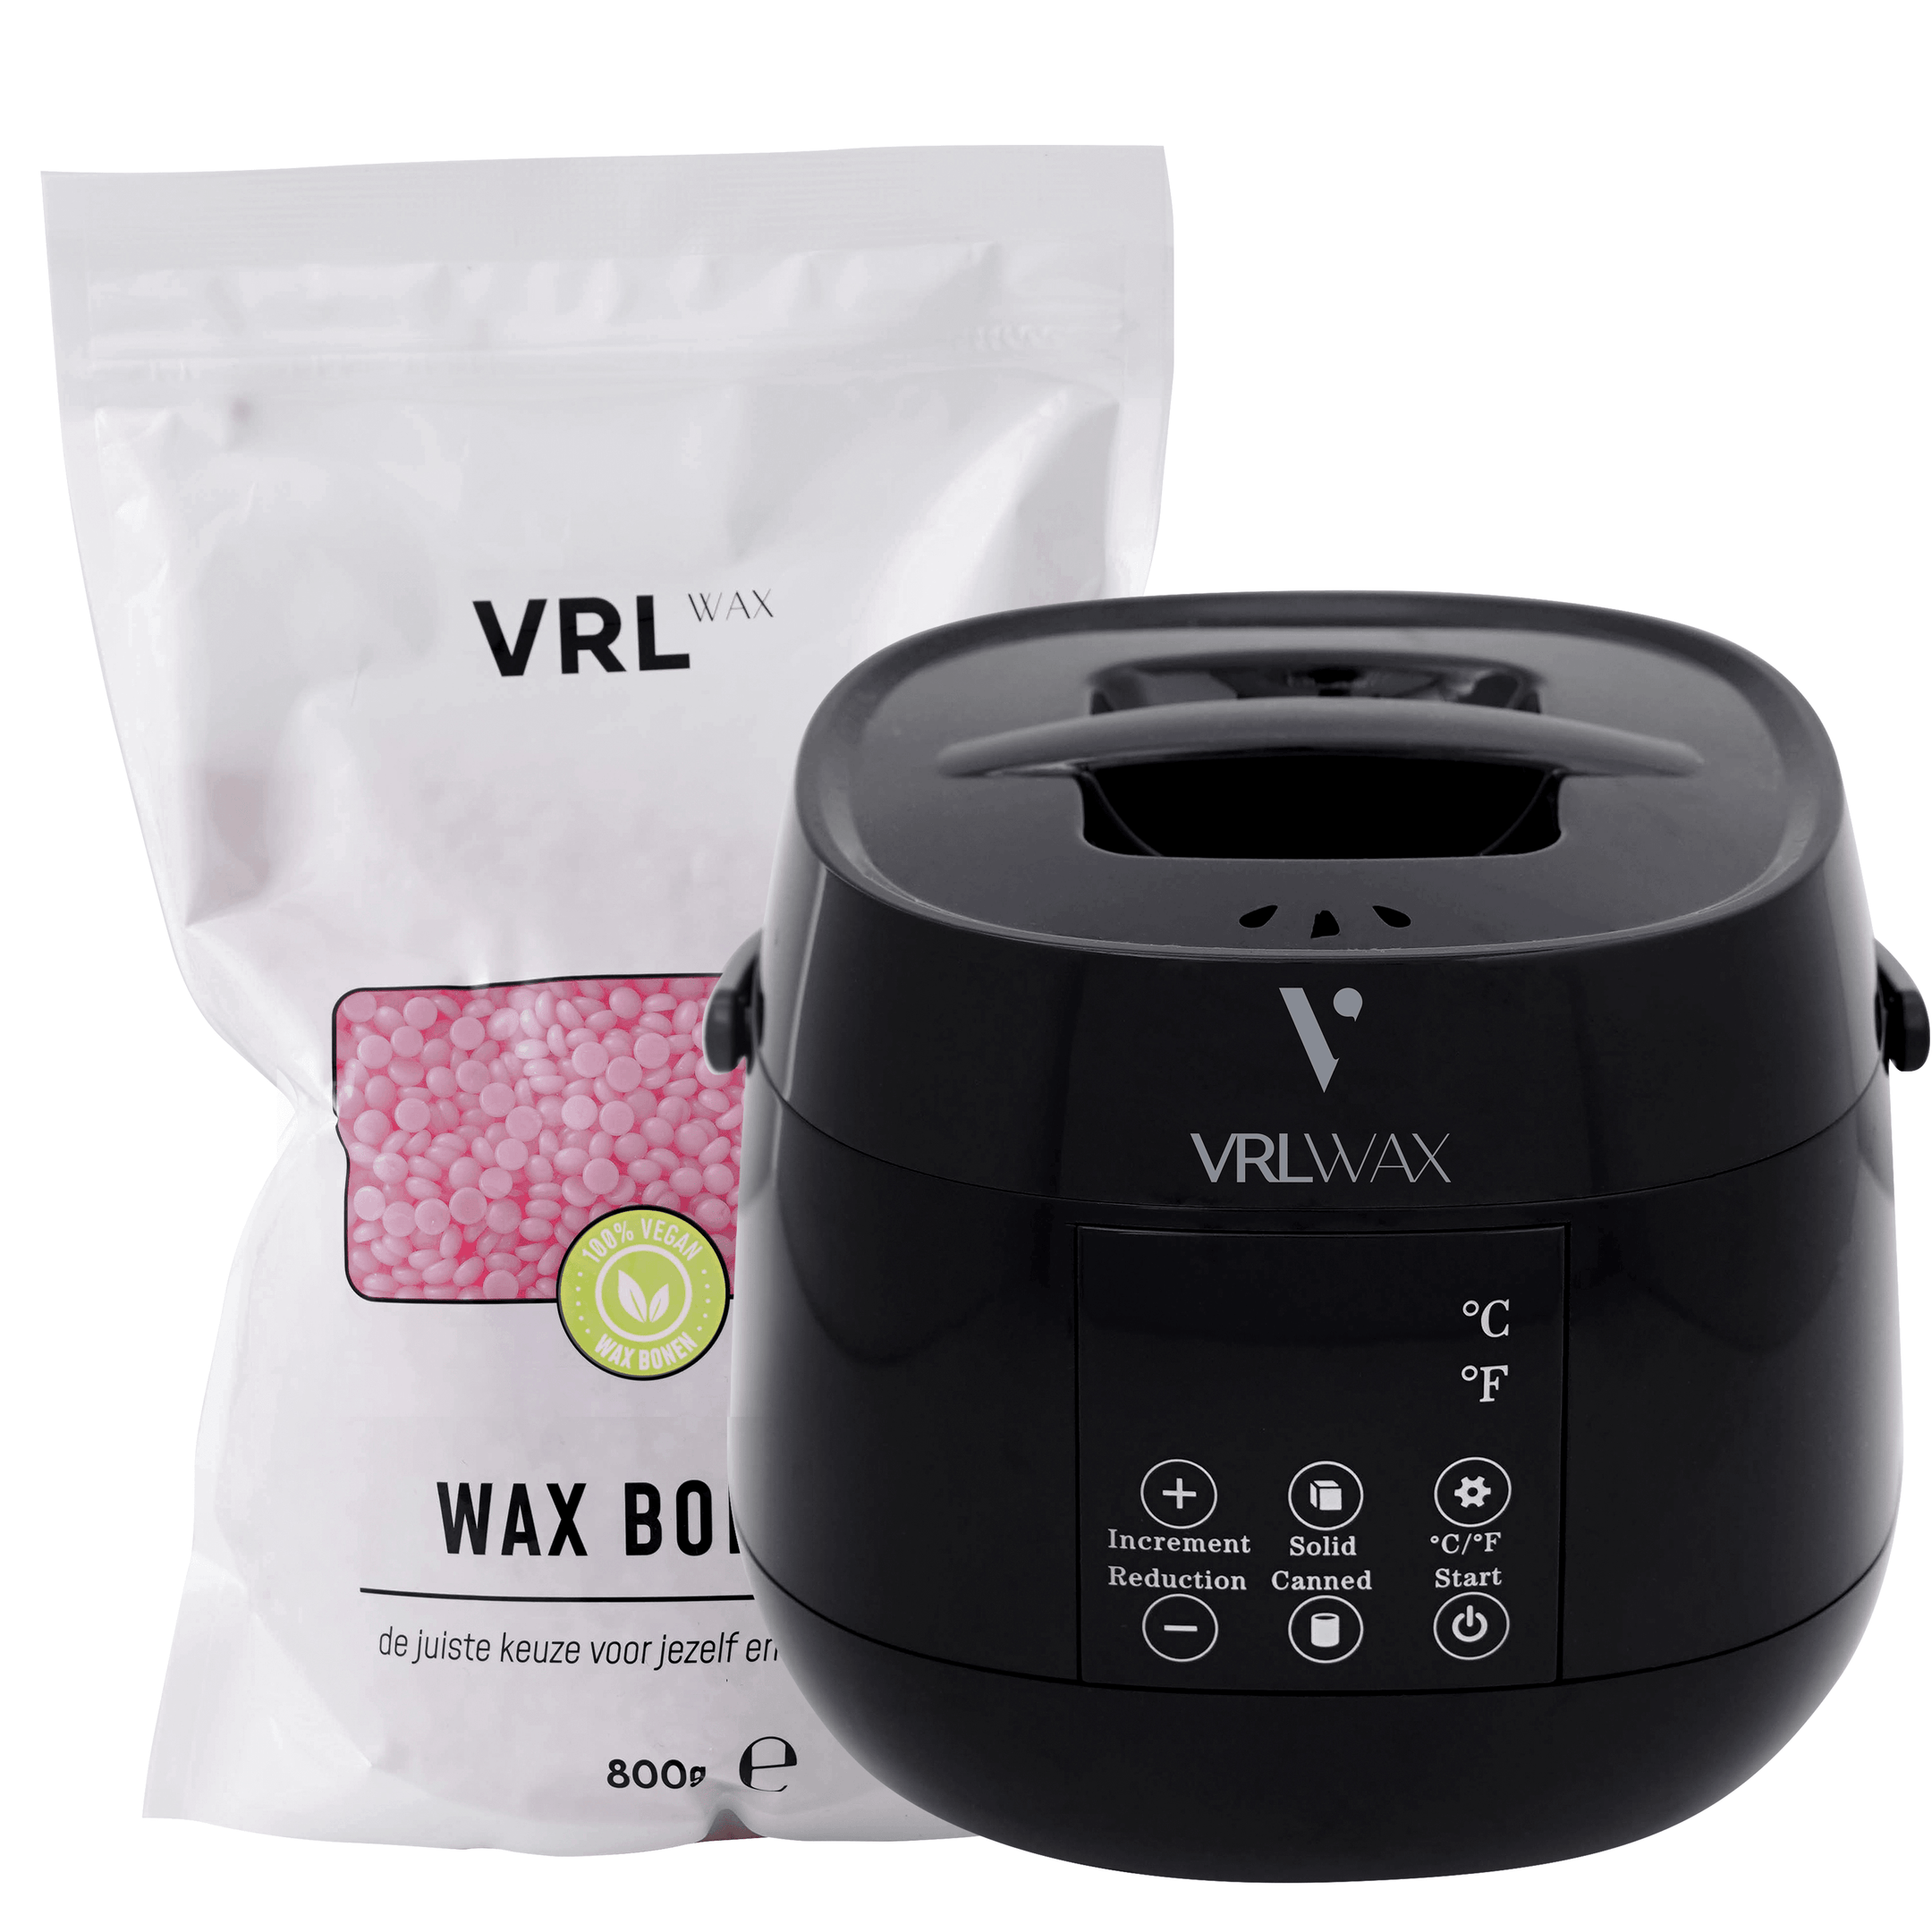 VRL Smart Wax Device Starter Kit - Hair Removal Device - Orange Wax Beans - Fragrance Free and Vegan